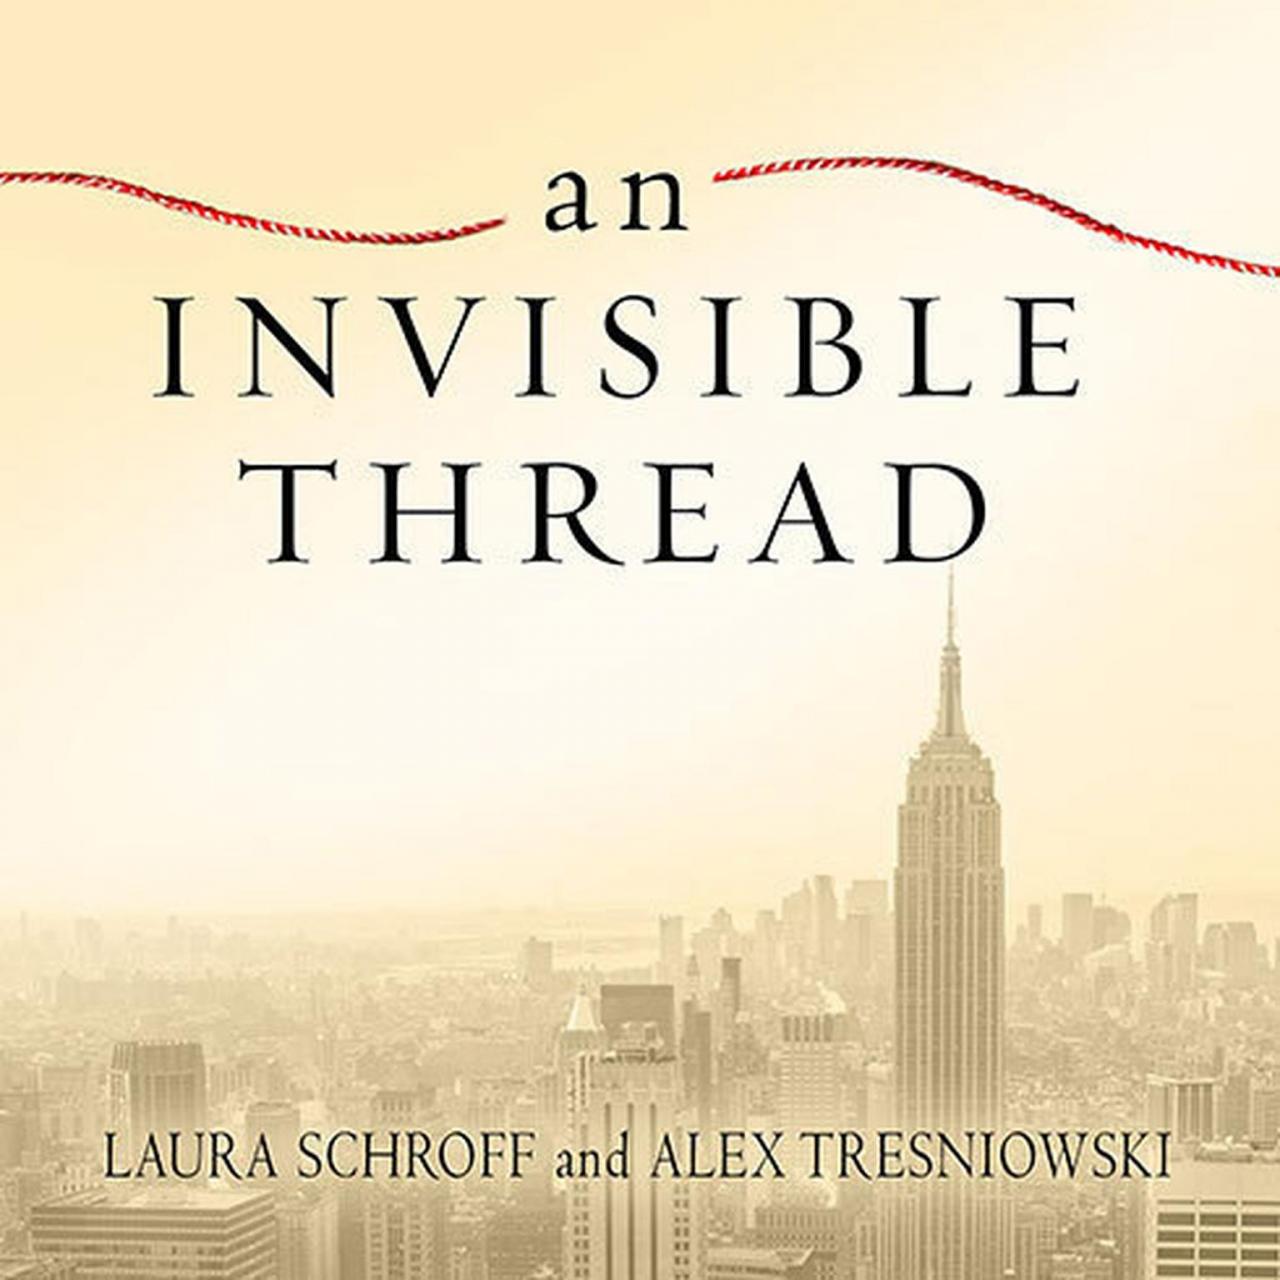 An invisible thread book club discussion